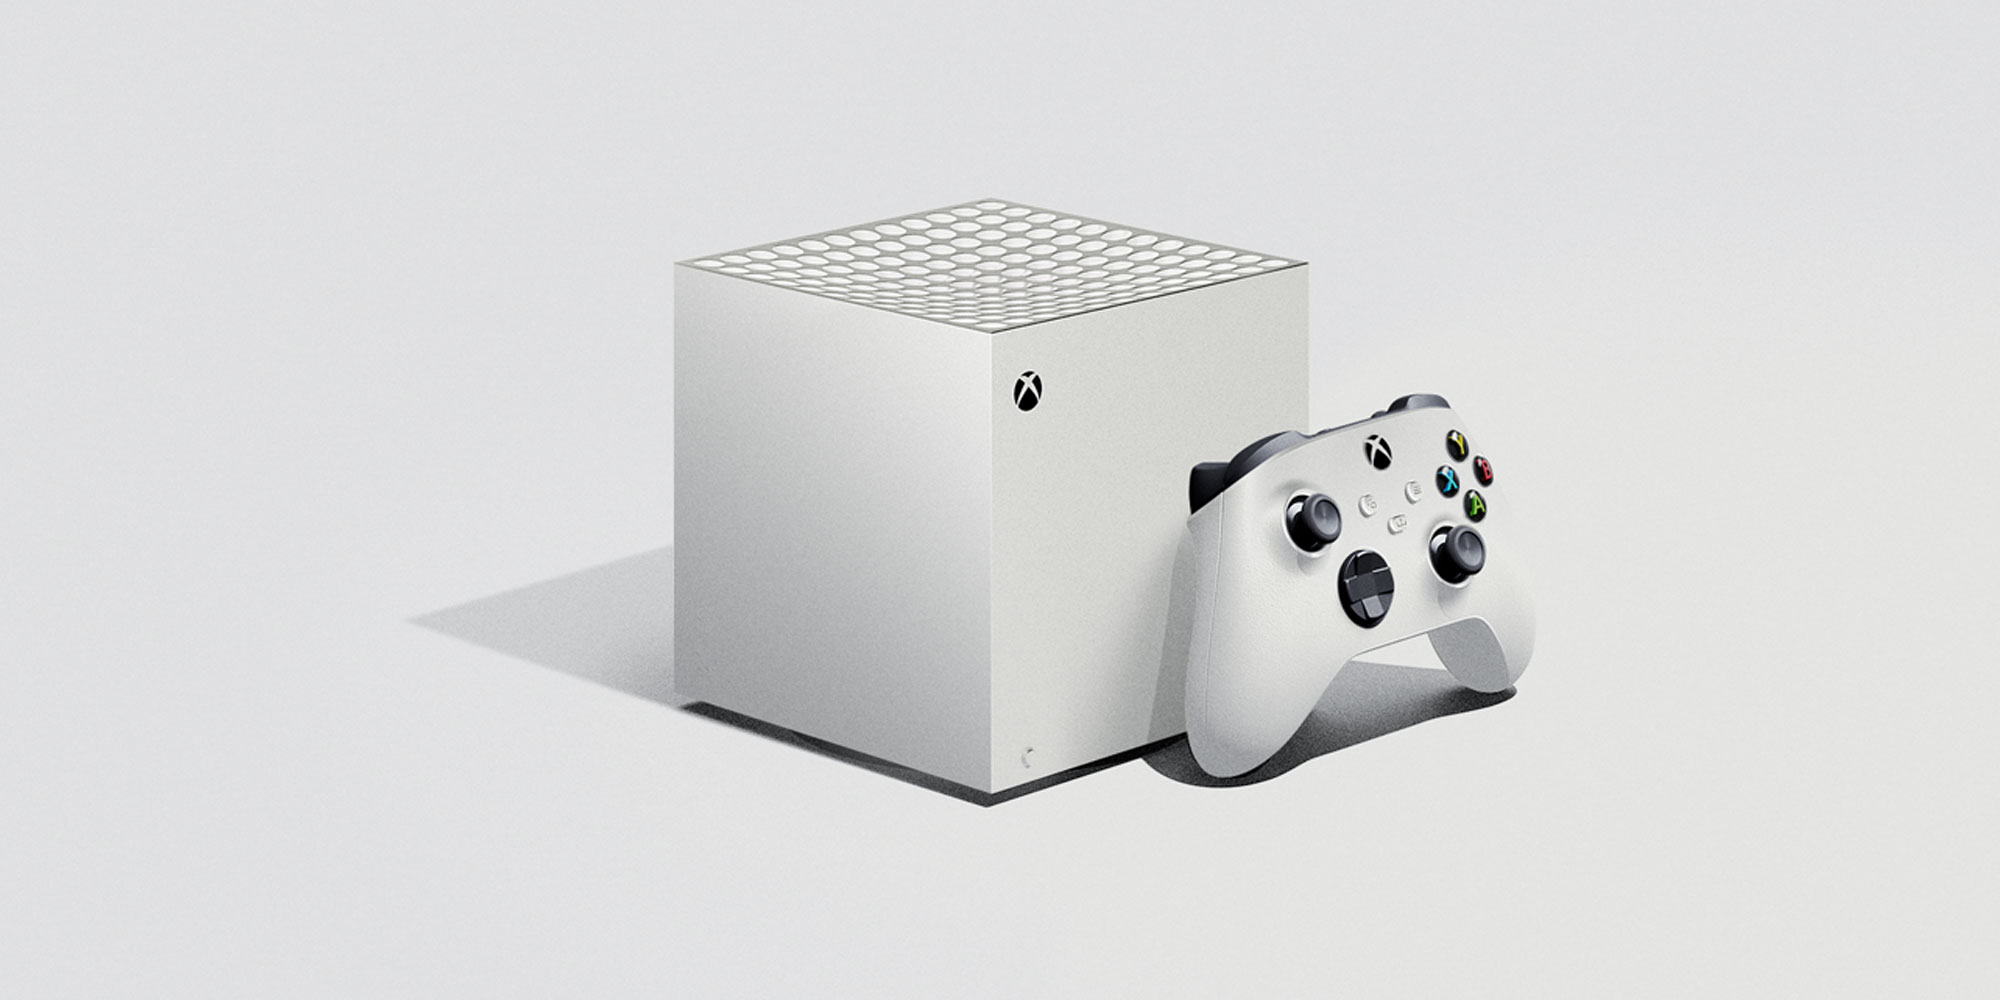 Xbox Series S might be announced in August w/ Series X CPU - 9to5Toys